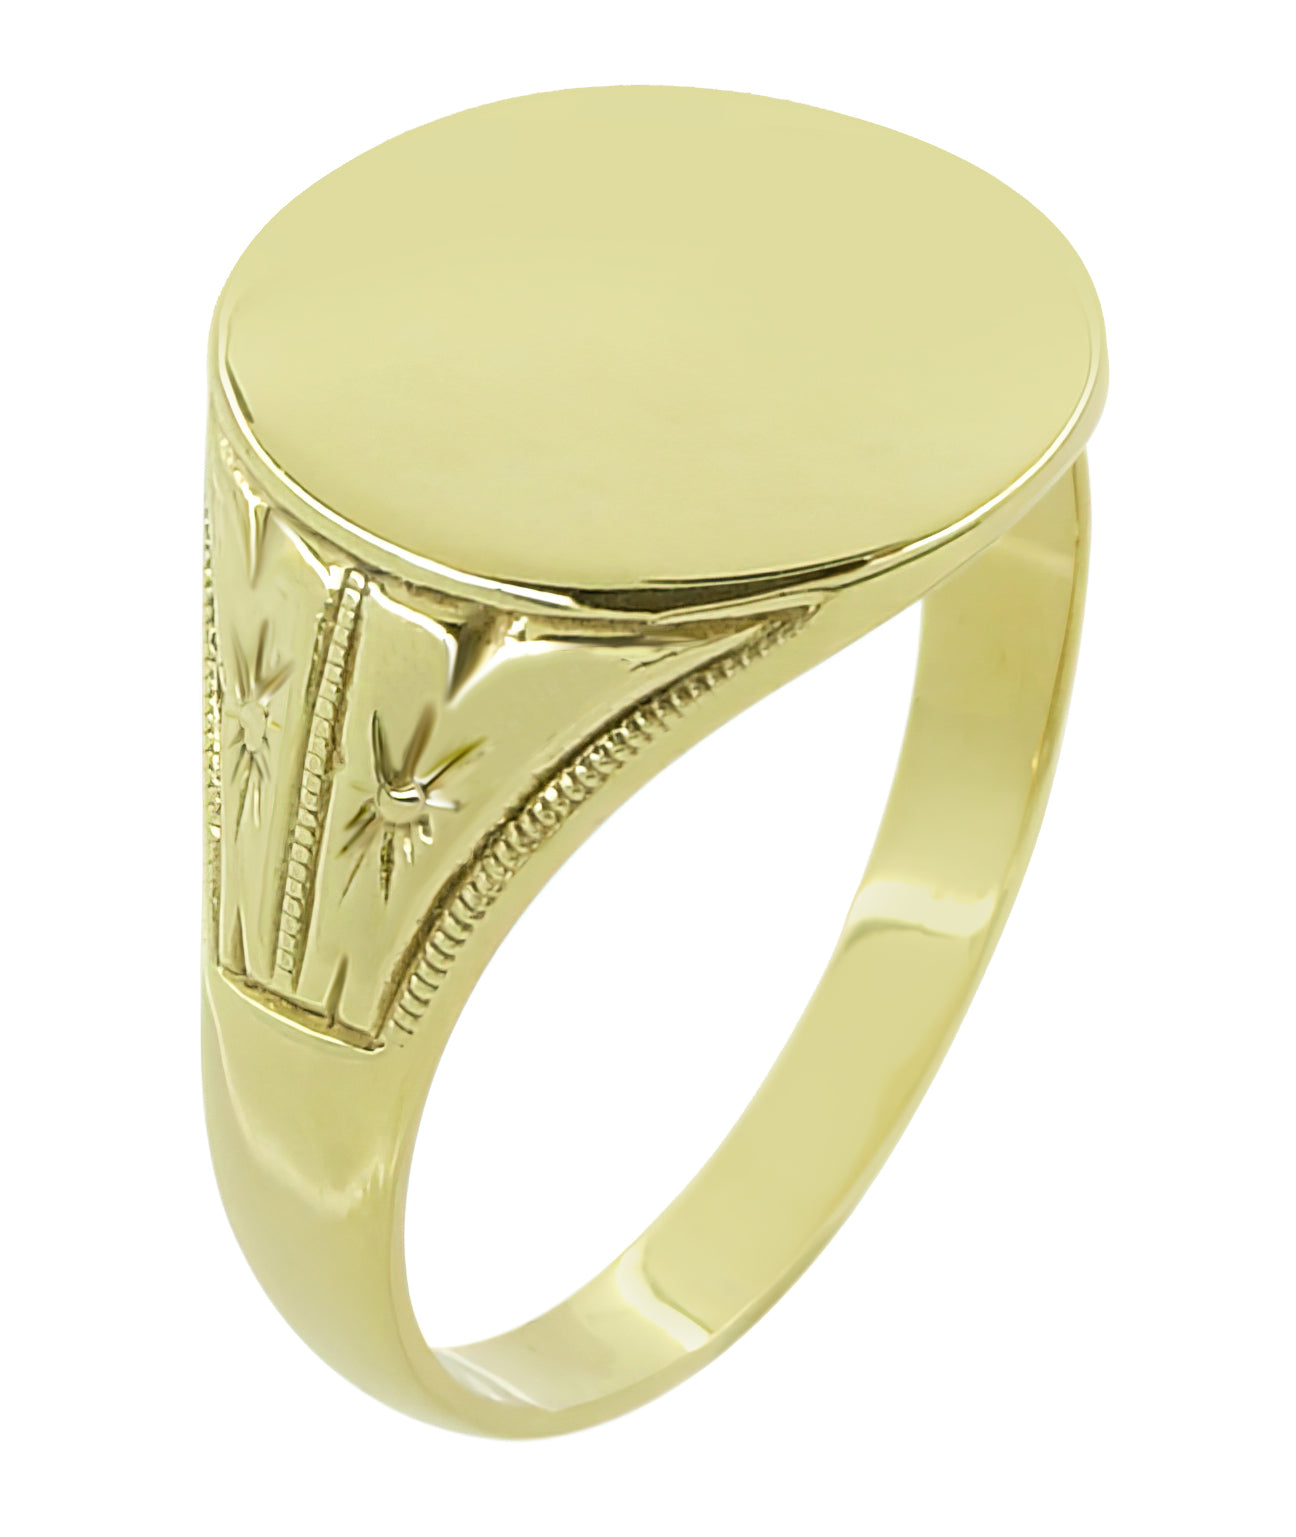 Kent Victorian Engraved Antique Style Oval Signet Ring in 14K Yellow Gold - Item: R980 - Image: 2